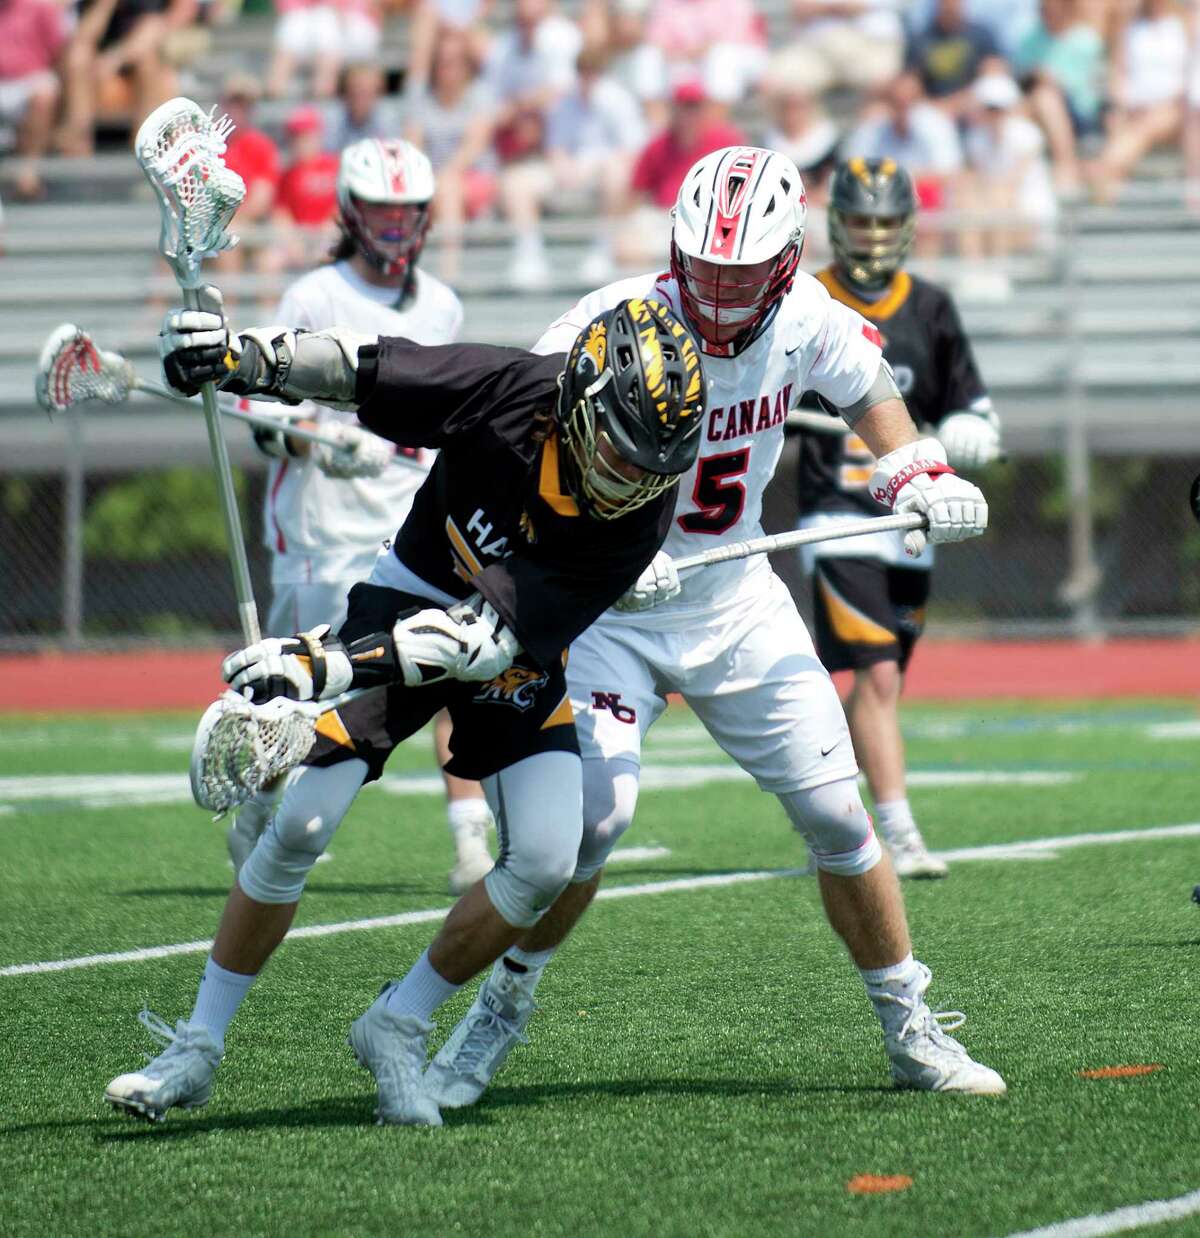 Daniel Hand's Liam Gottlick controls the ball as New Canaan's James Crovatto is close behind during the Class M Boys Lacrosse final at Brien McMahon High School in Norwalk, Conn., on Saturday, June 10, 2017.